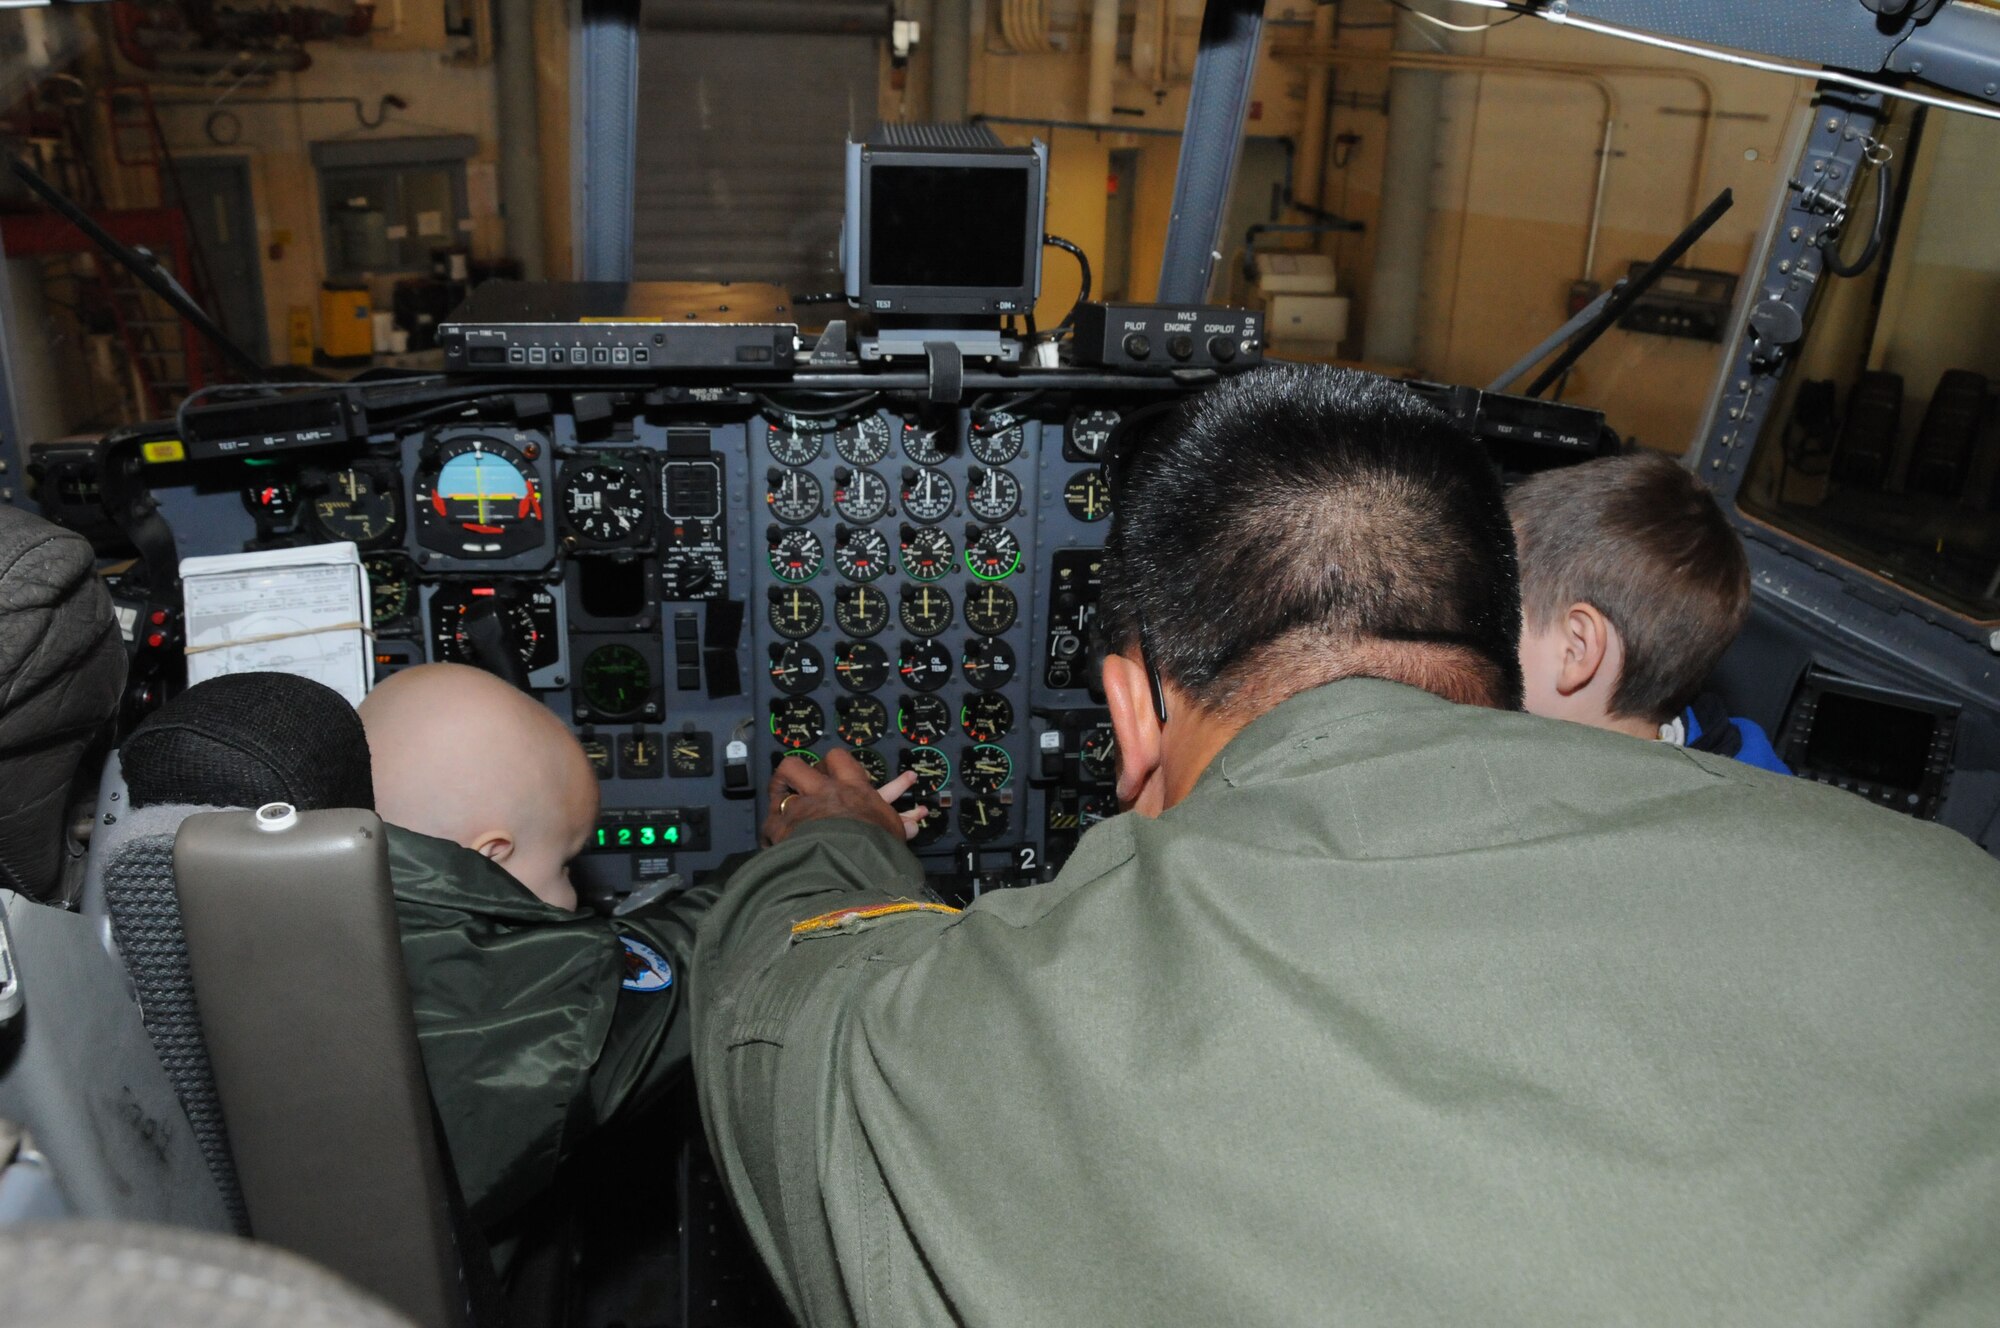 A local 3-year-old boy's dream came true when he reported to the 107th Airlift Wing for the day as an honorary pilot. Maj. Michael Galvin shows Logan the gadgets in the cock pit of a C-130. (U.S. Air Force photo/Staff Sgt. Peter Dean)  